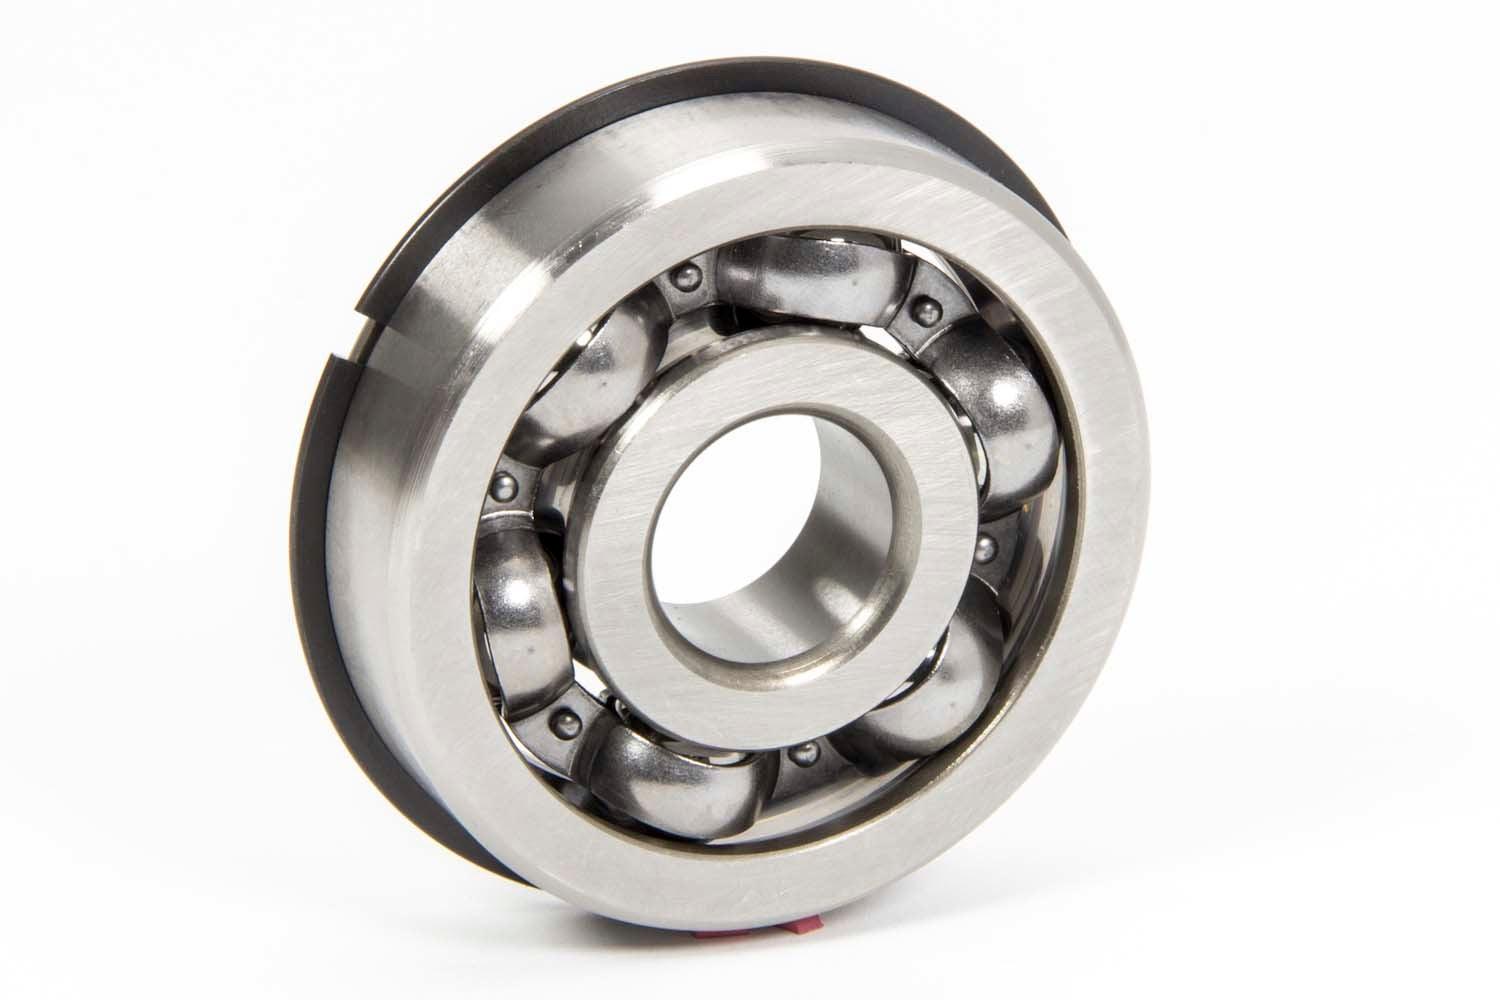 Bearing For Gear Cover Fits Billet & Sprint Cvr - Burlile Performance Products